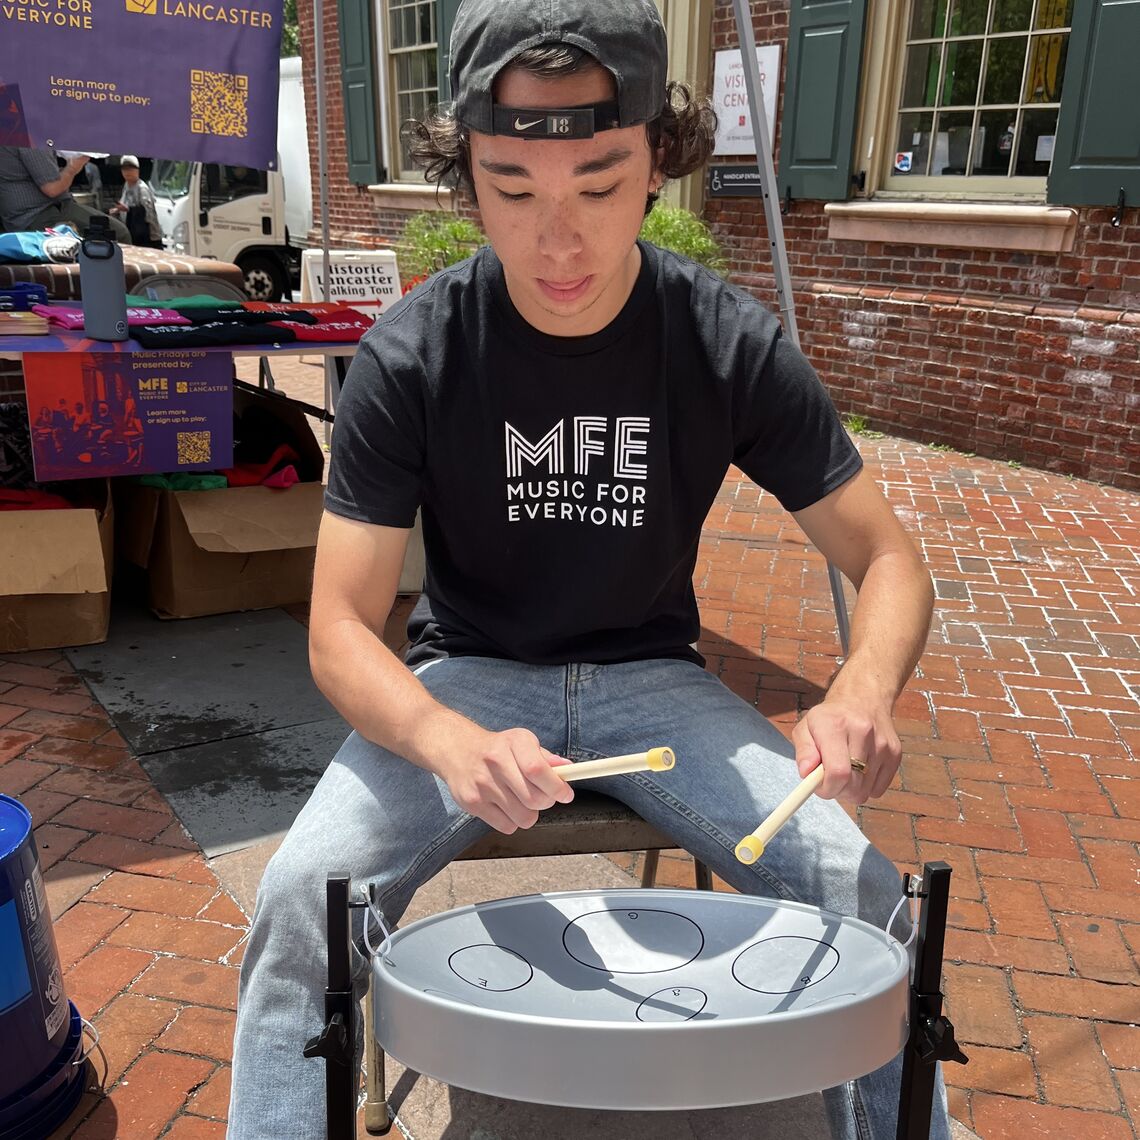 “As a music major, I've thought a lot about going into education. But I'm also really interested in nonprofit community work. Music for Everyone is a great place for me to be for that," said Reece Chang '24, who is spending his summer working with the Lancaster nonprofit.